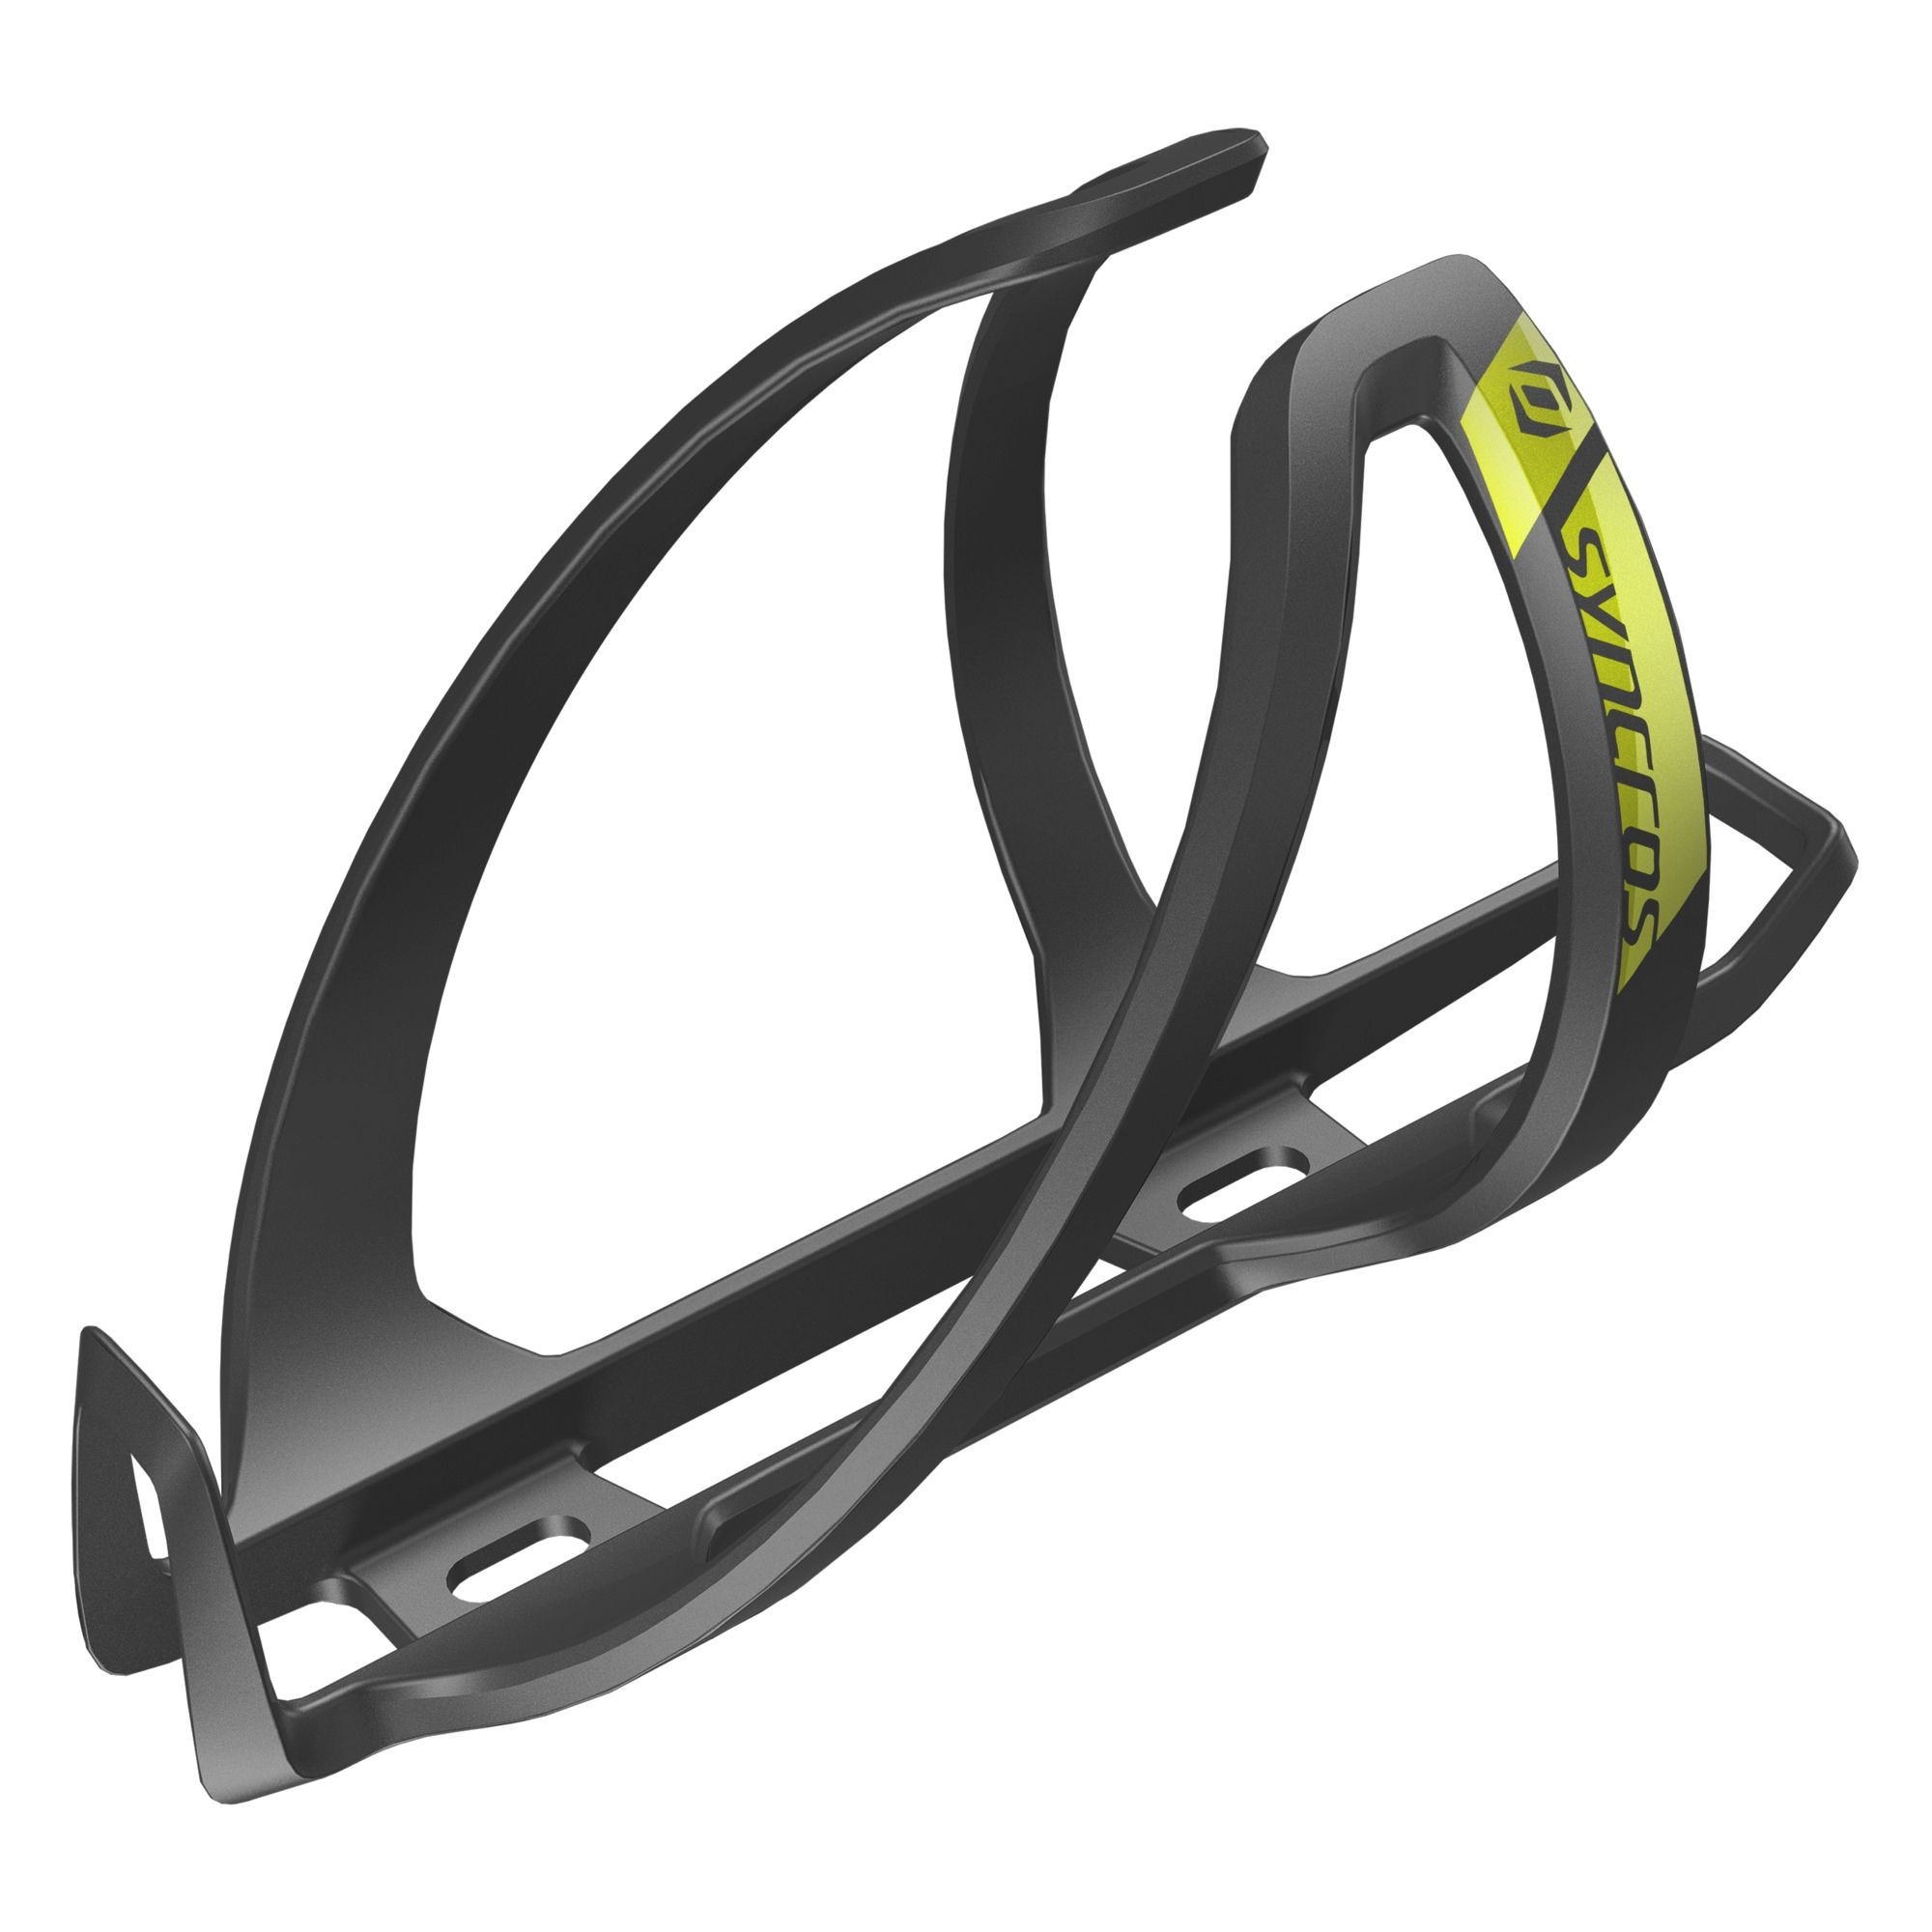 SYN Bottle cage coupe cage 2.0 Svart/gul 